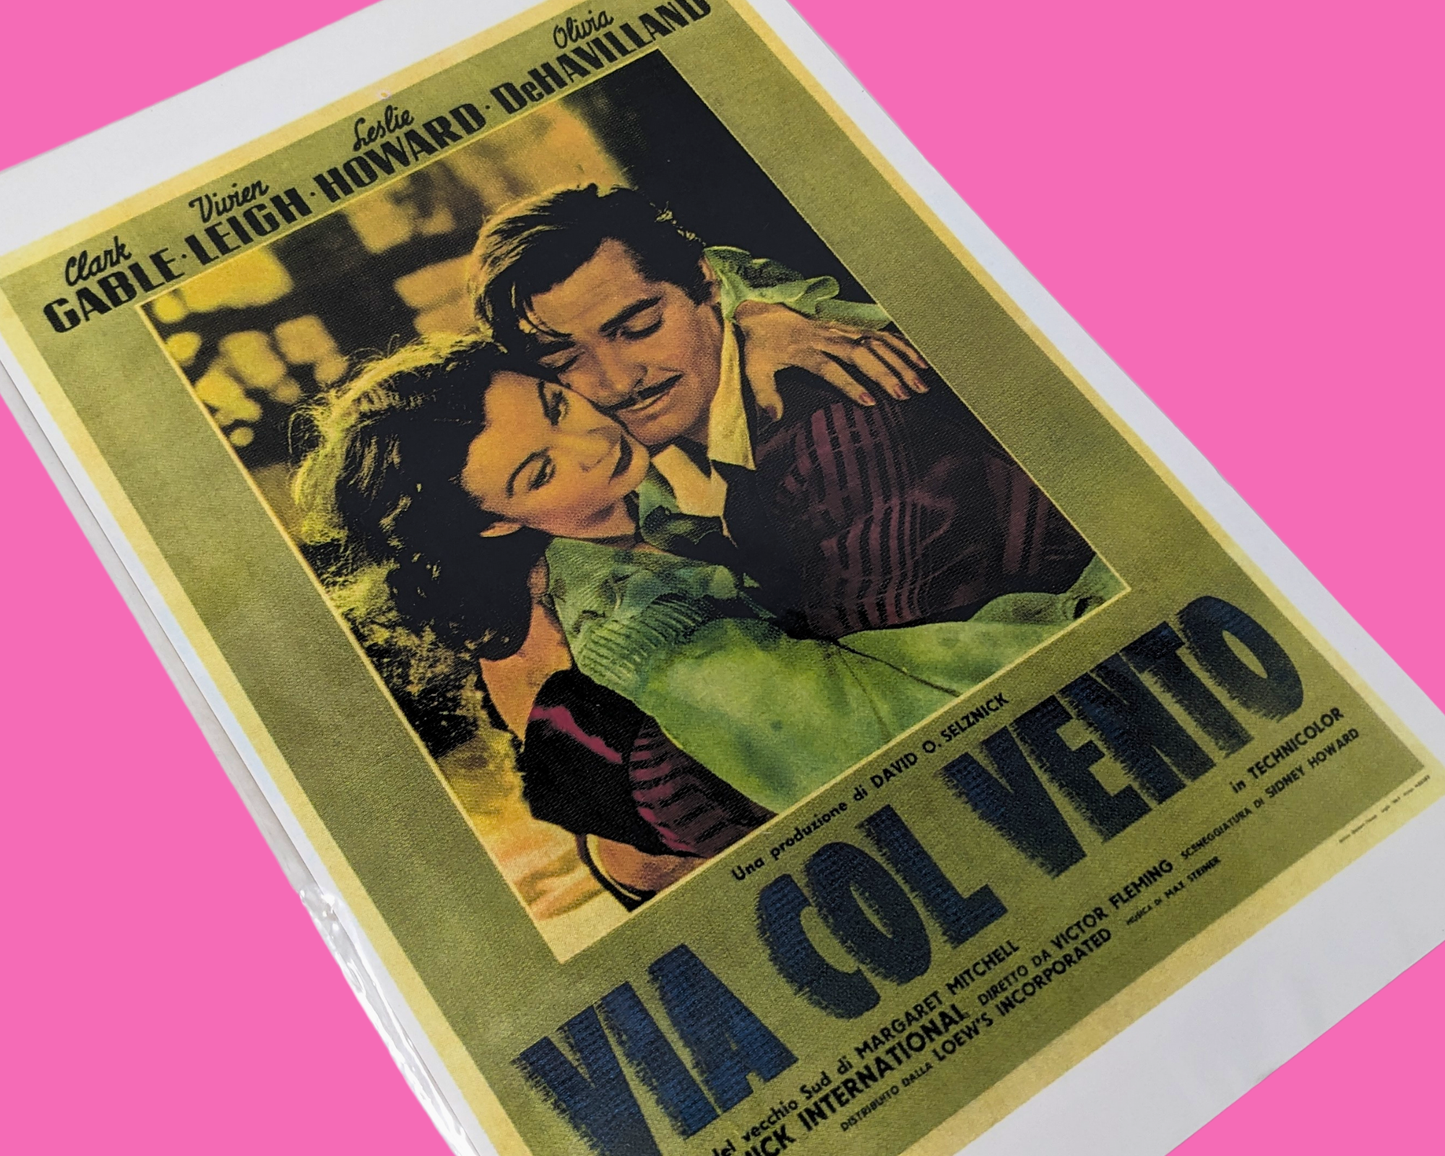 Italian Poster of Gone with the Wind